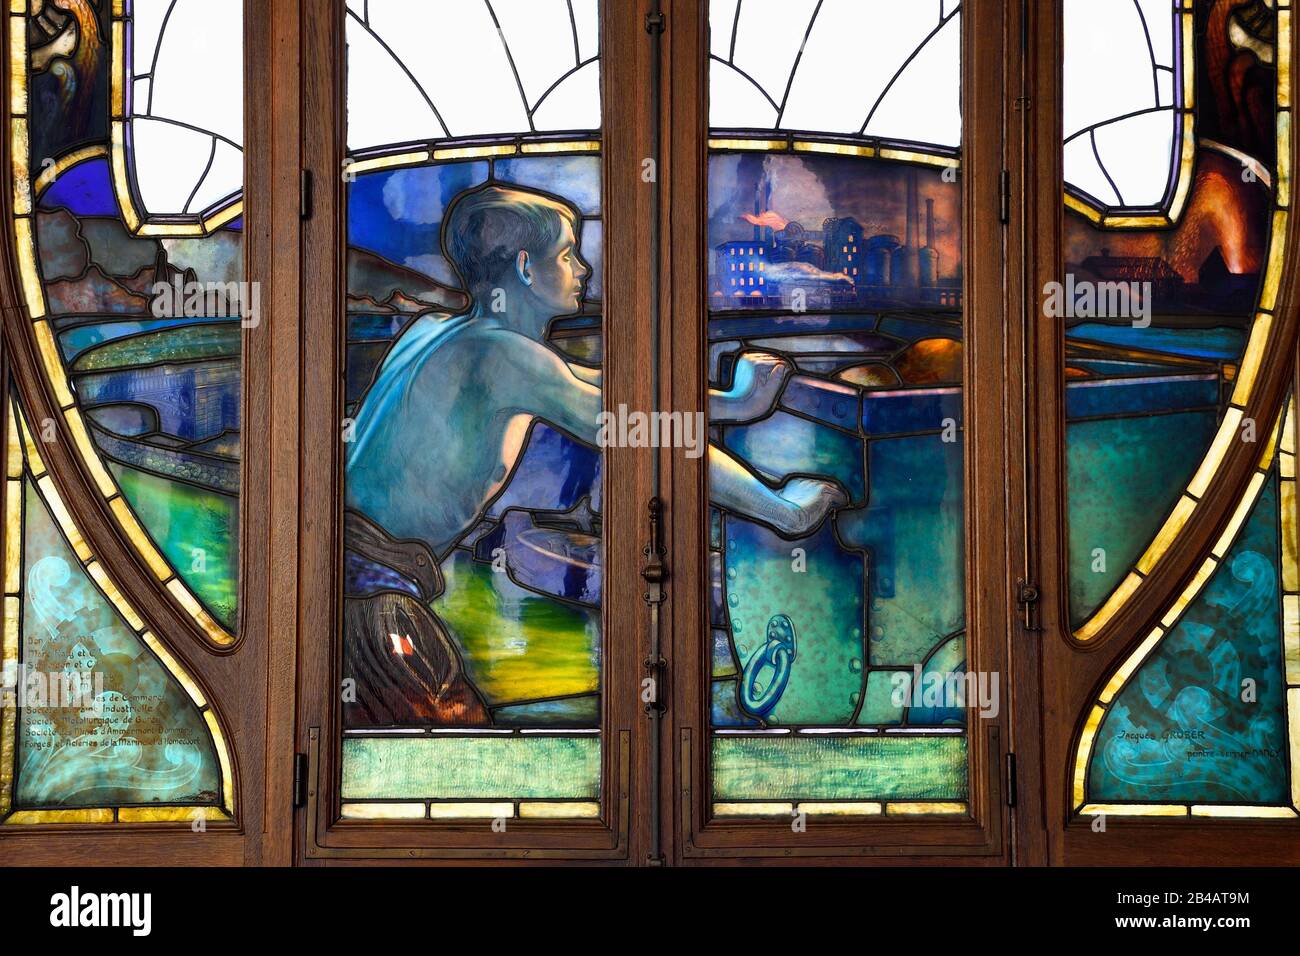 France, Meurthe et Moselle, Nancy, Art Nouveau building of the Chamber of Commerce and Industry (CCI), stained glass on the ground floor representing the strengths of Lorraine industry designed by Jacques Gruber, iron exploitation and work Stock Photo